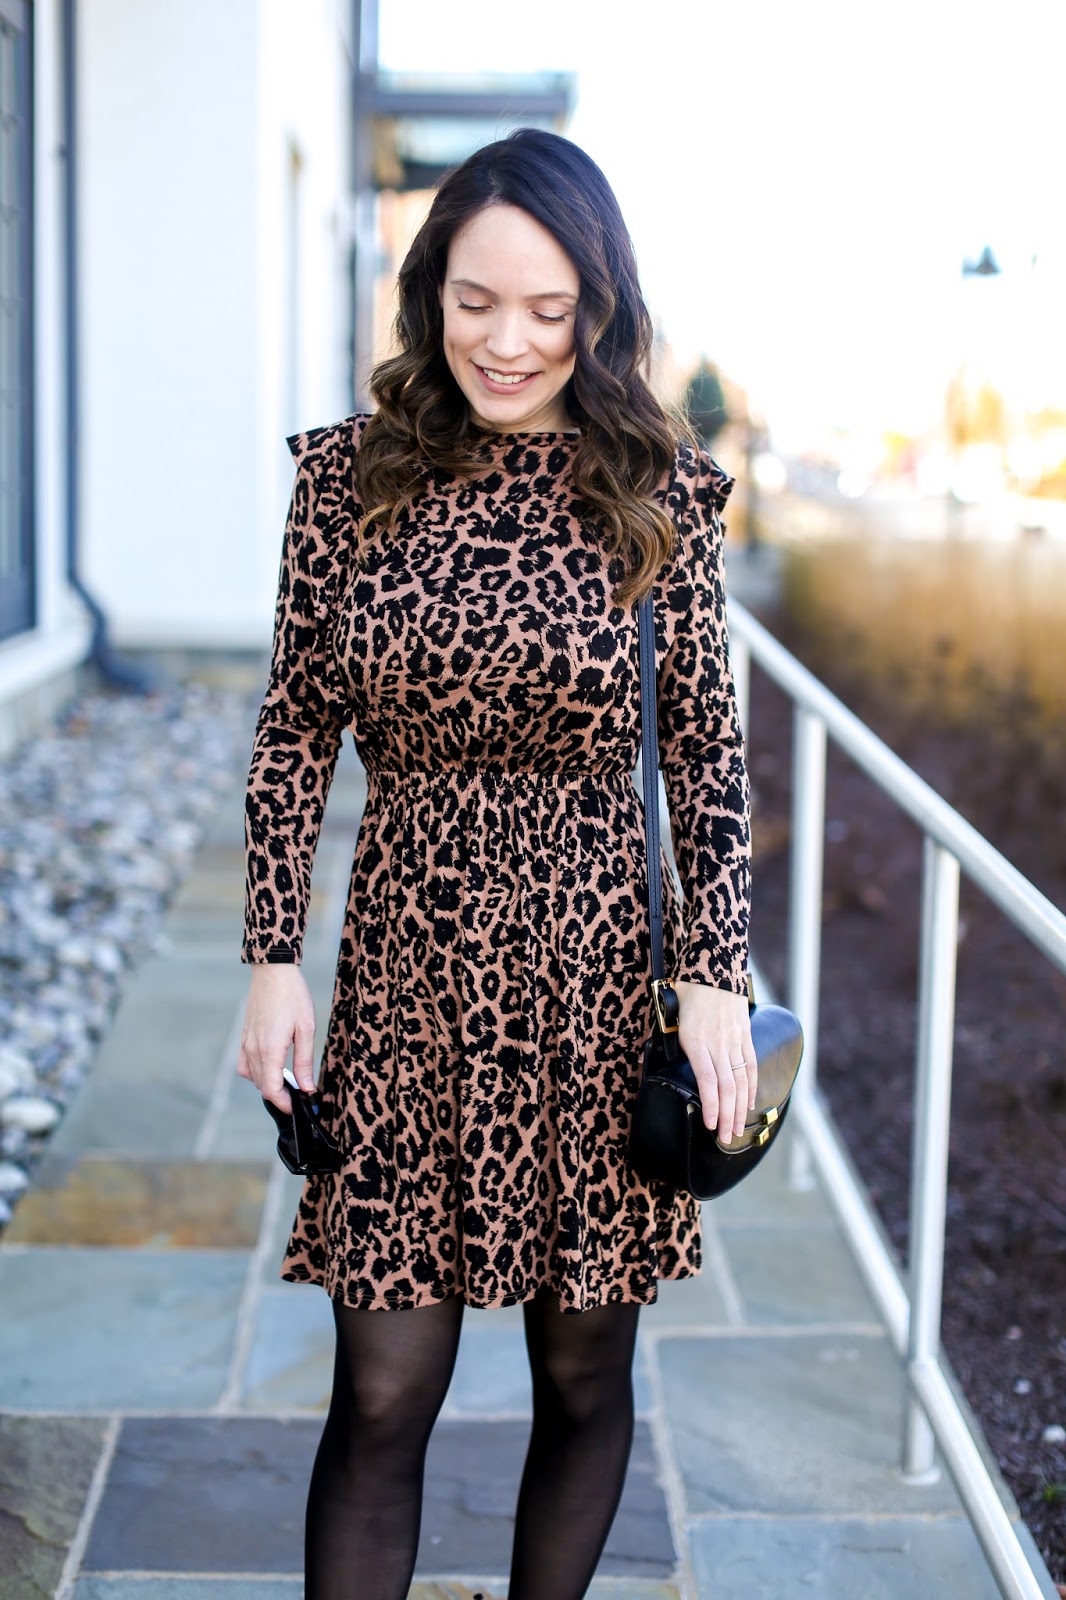 Leopard Print For the Holidays